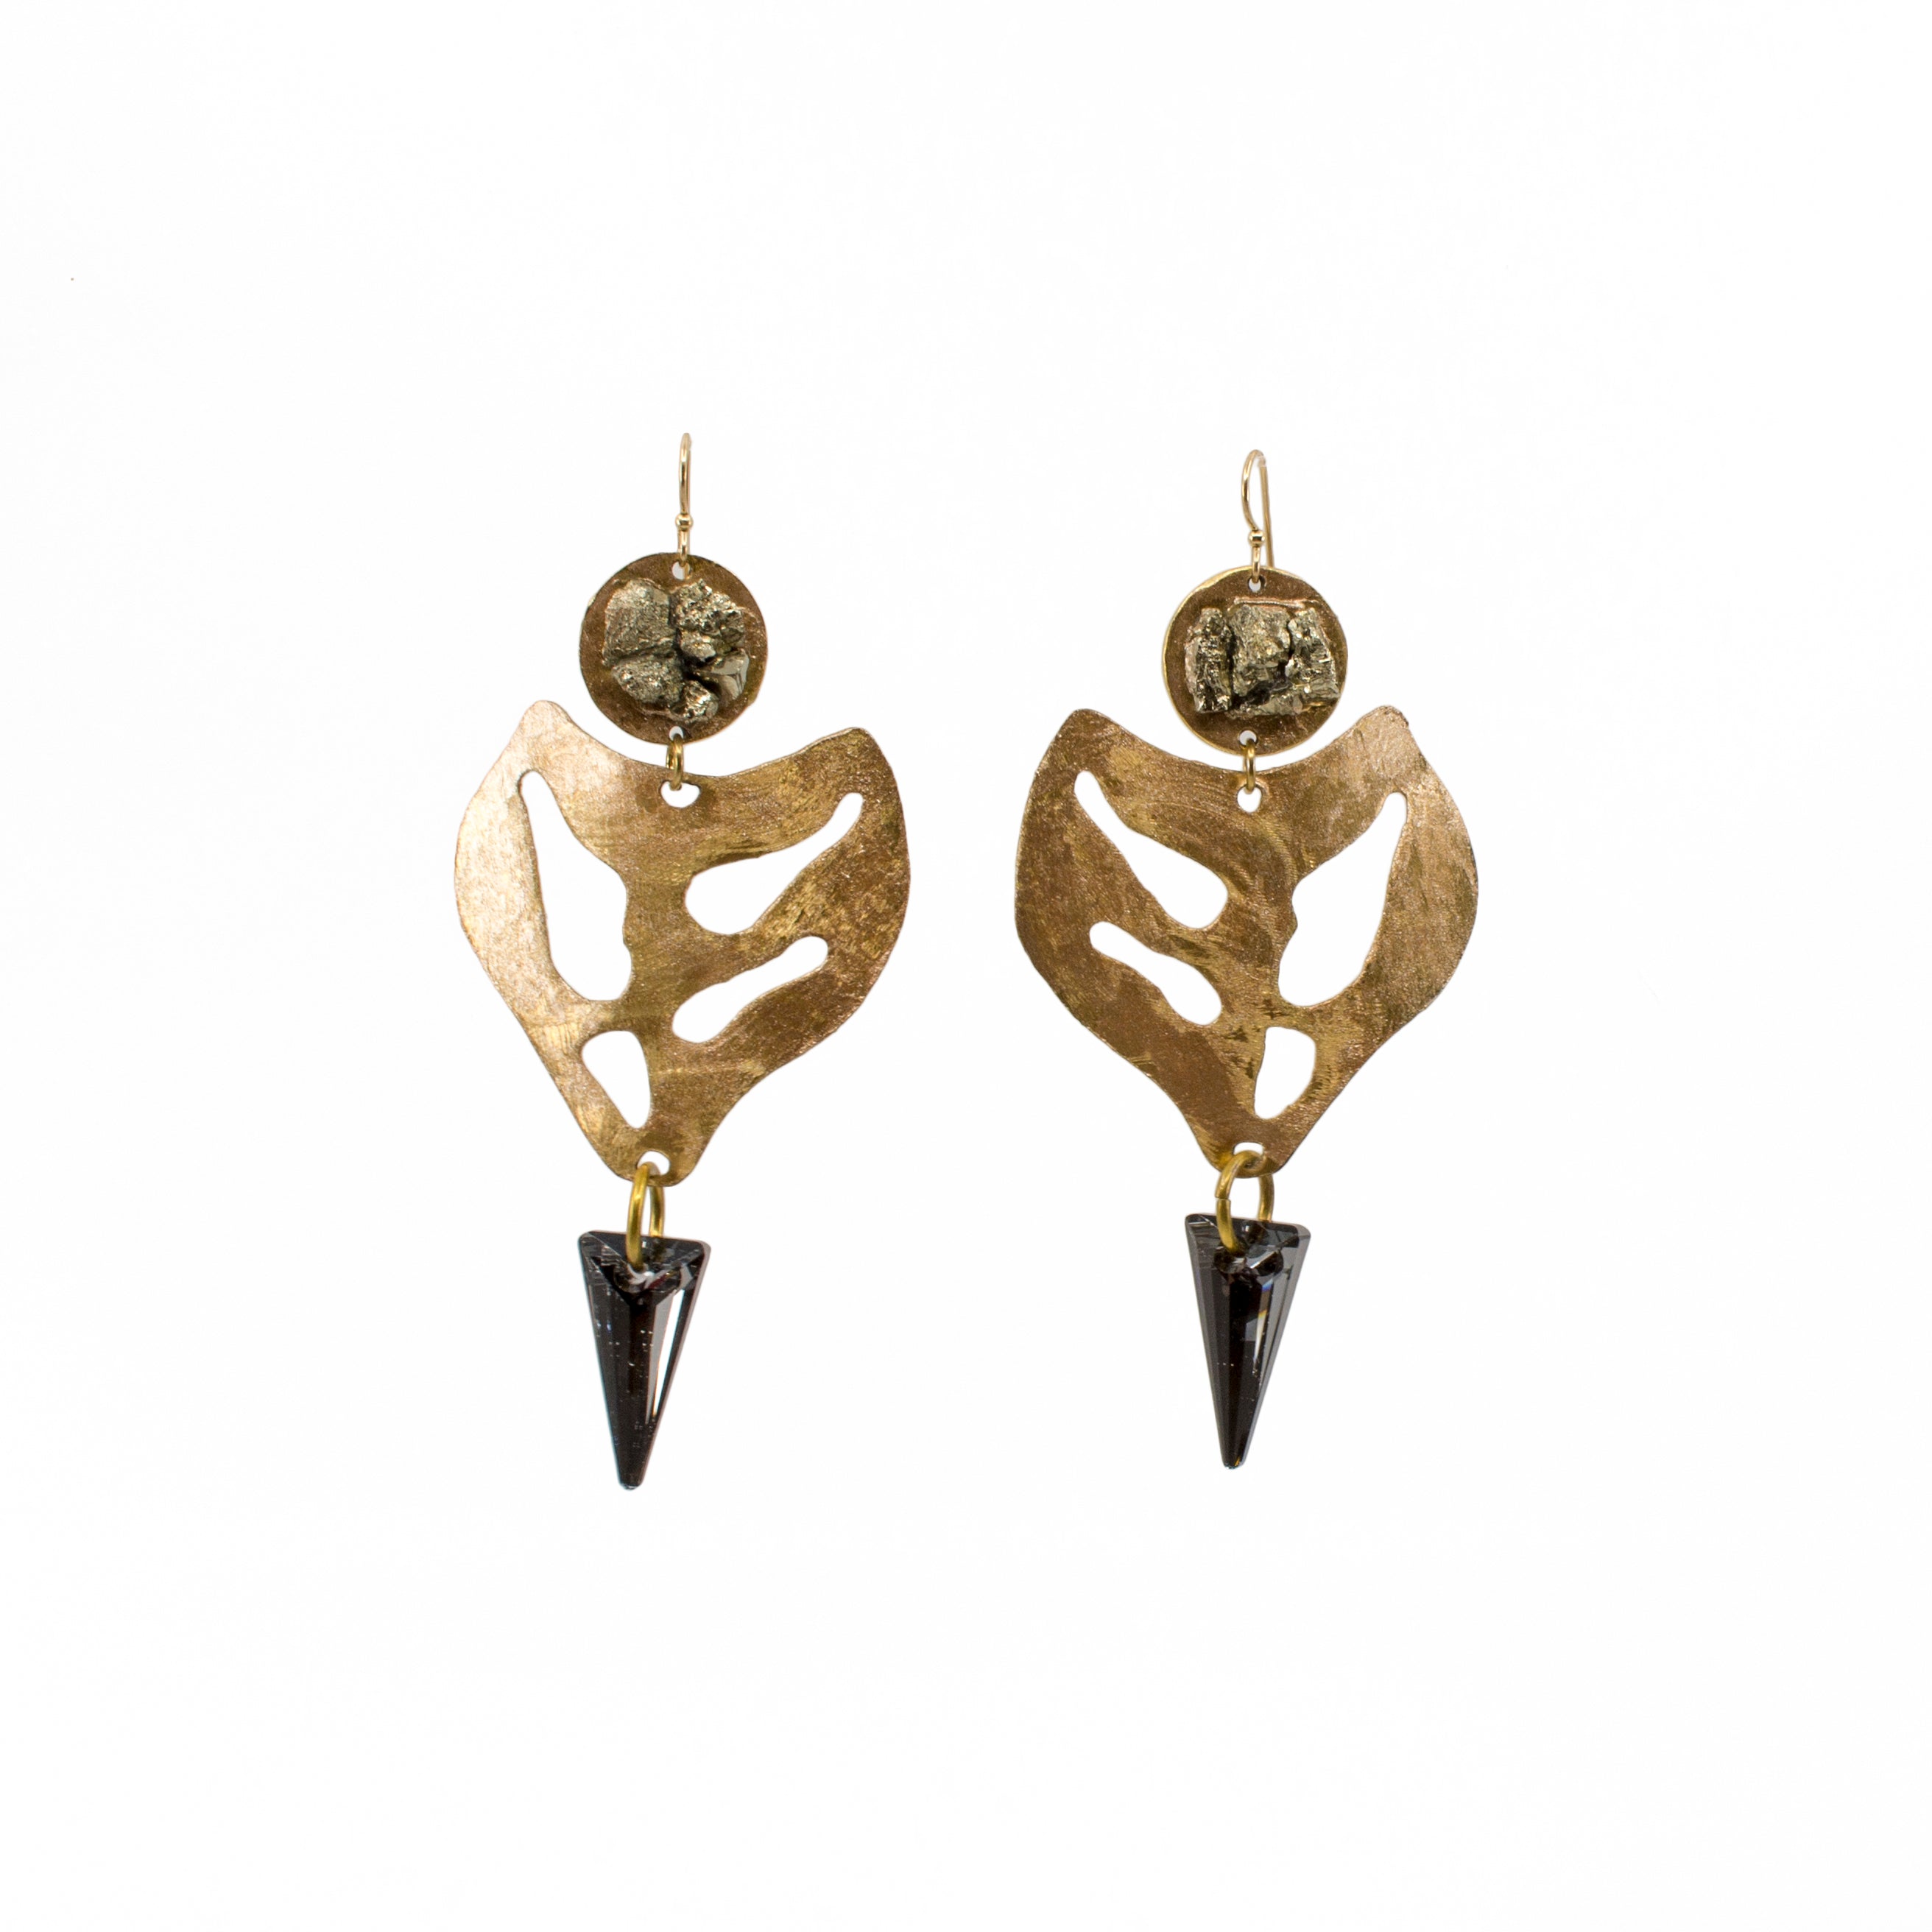 Hammered Brass Pyrite Earrings with Black Swarovski Spikes